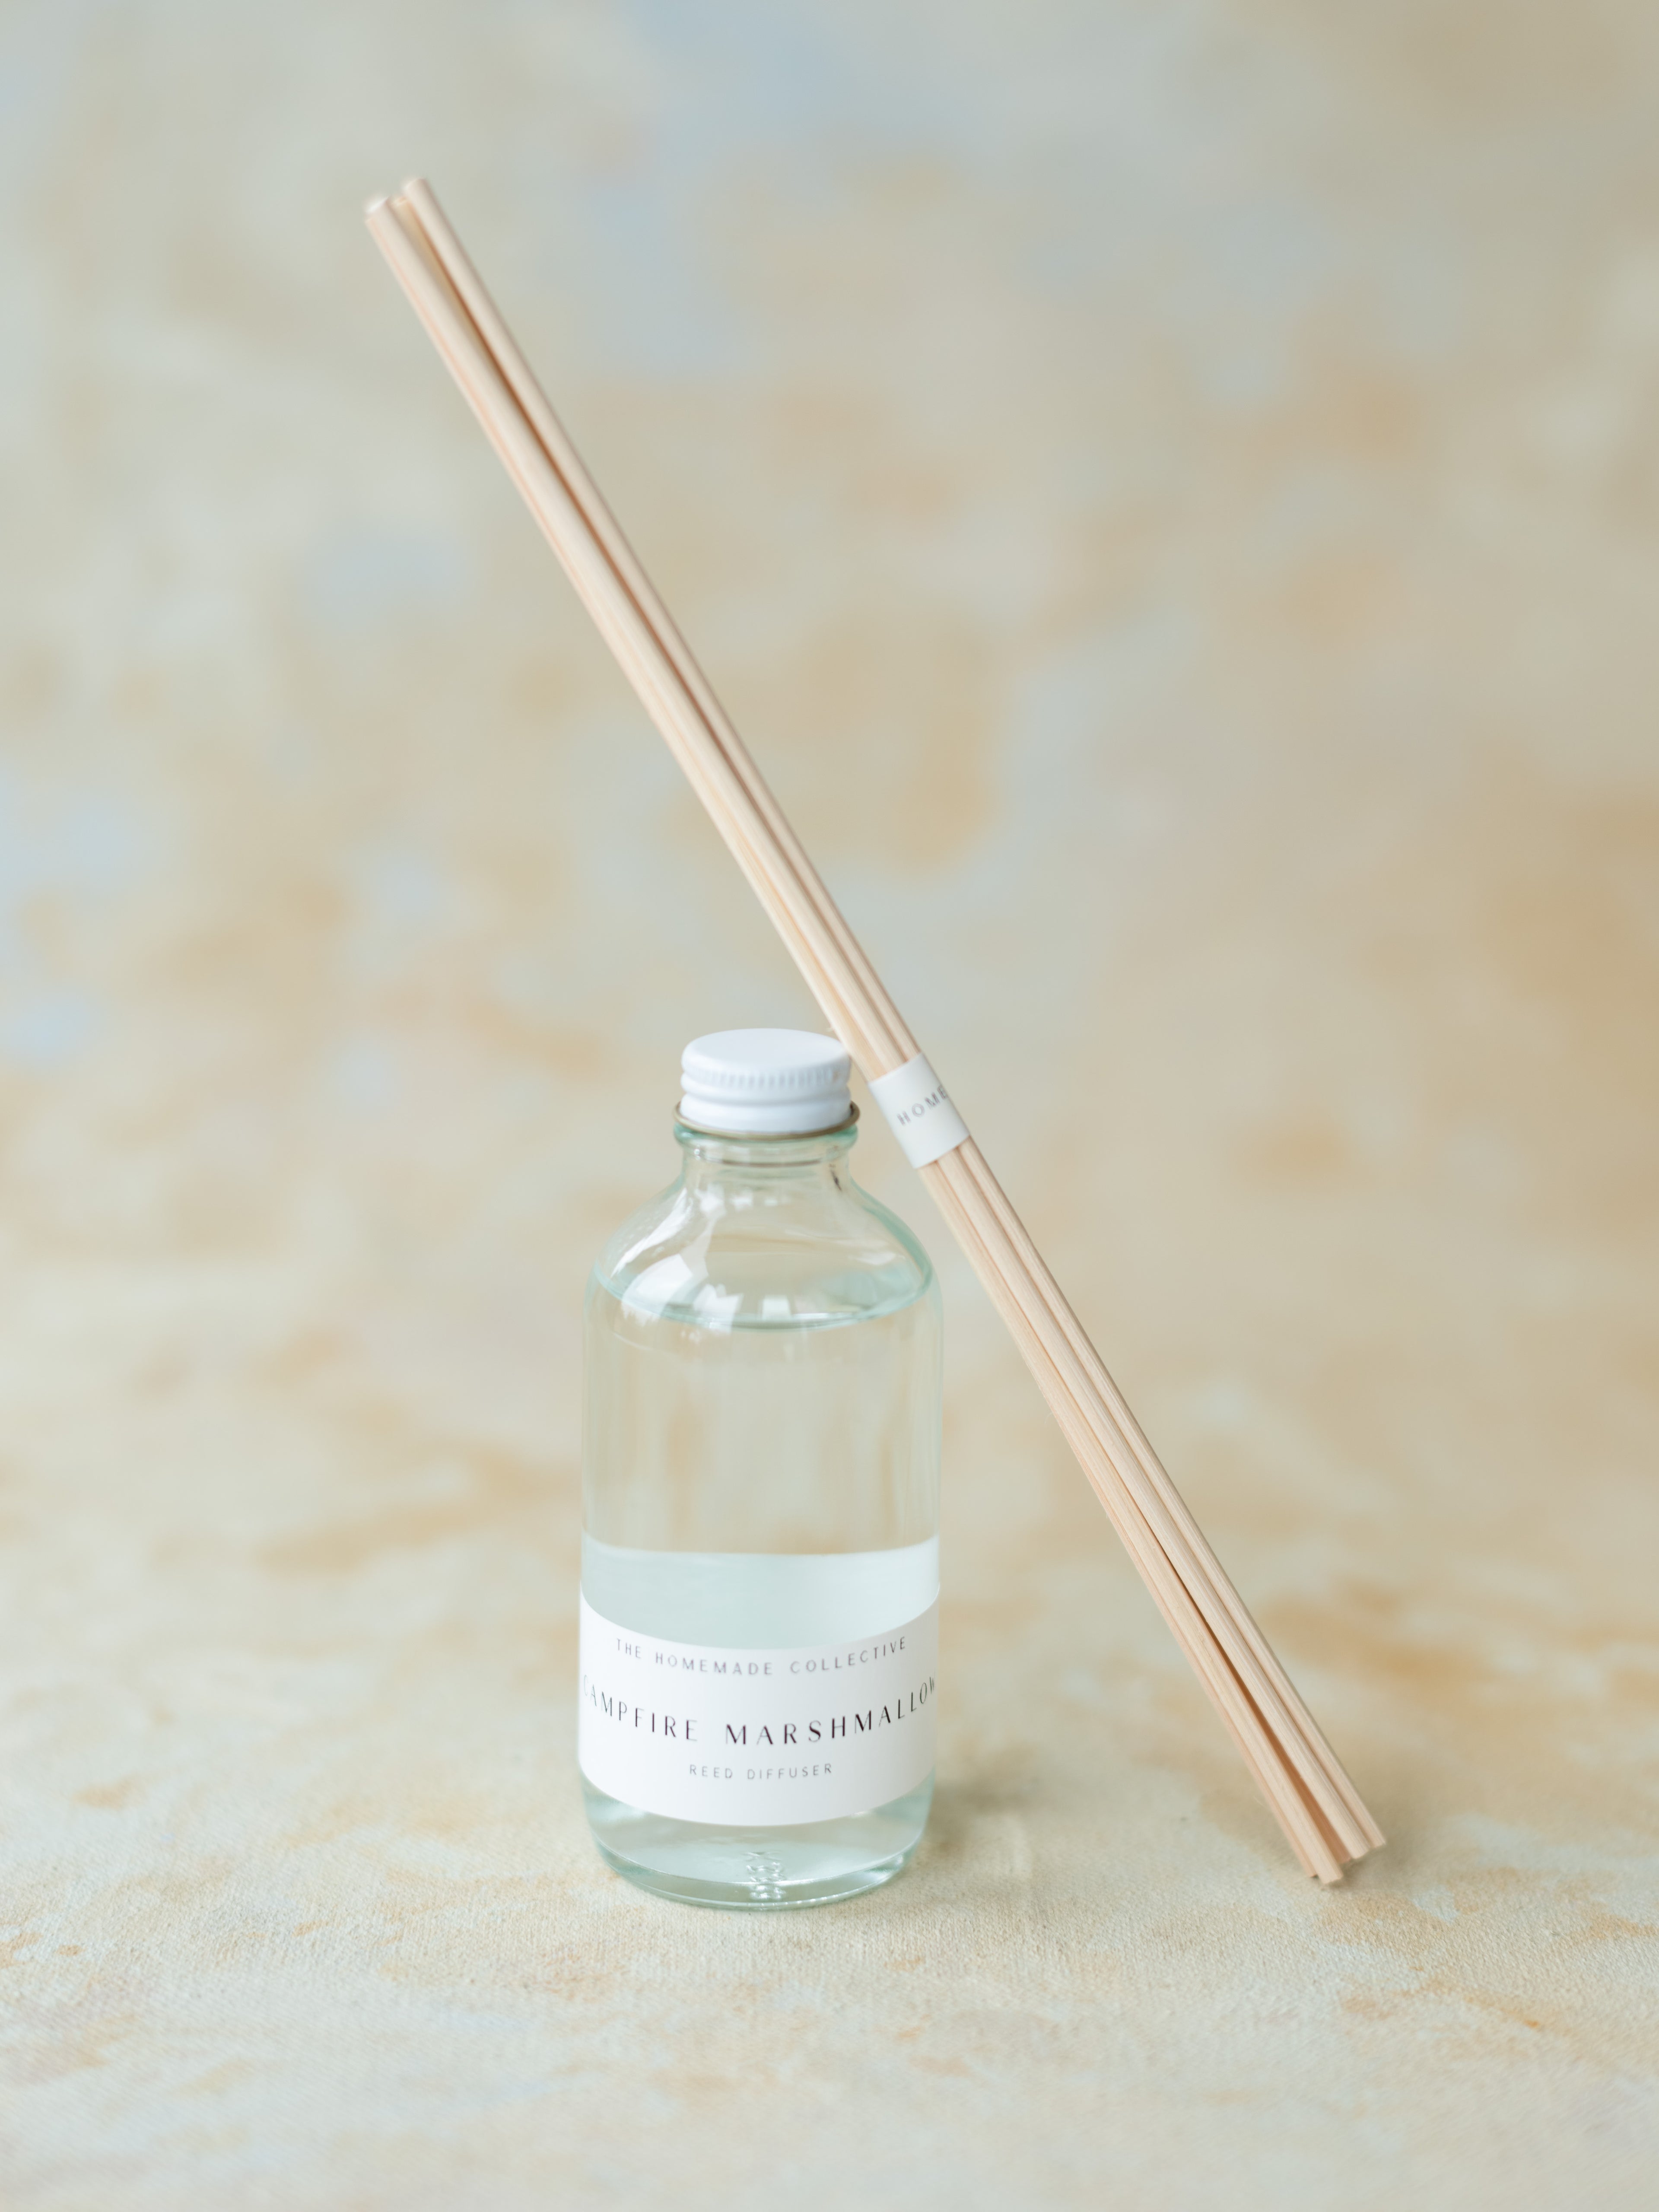 Campfire Marshmallow Reed Diffuser